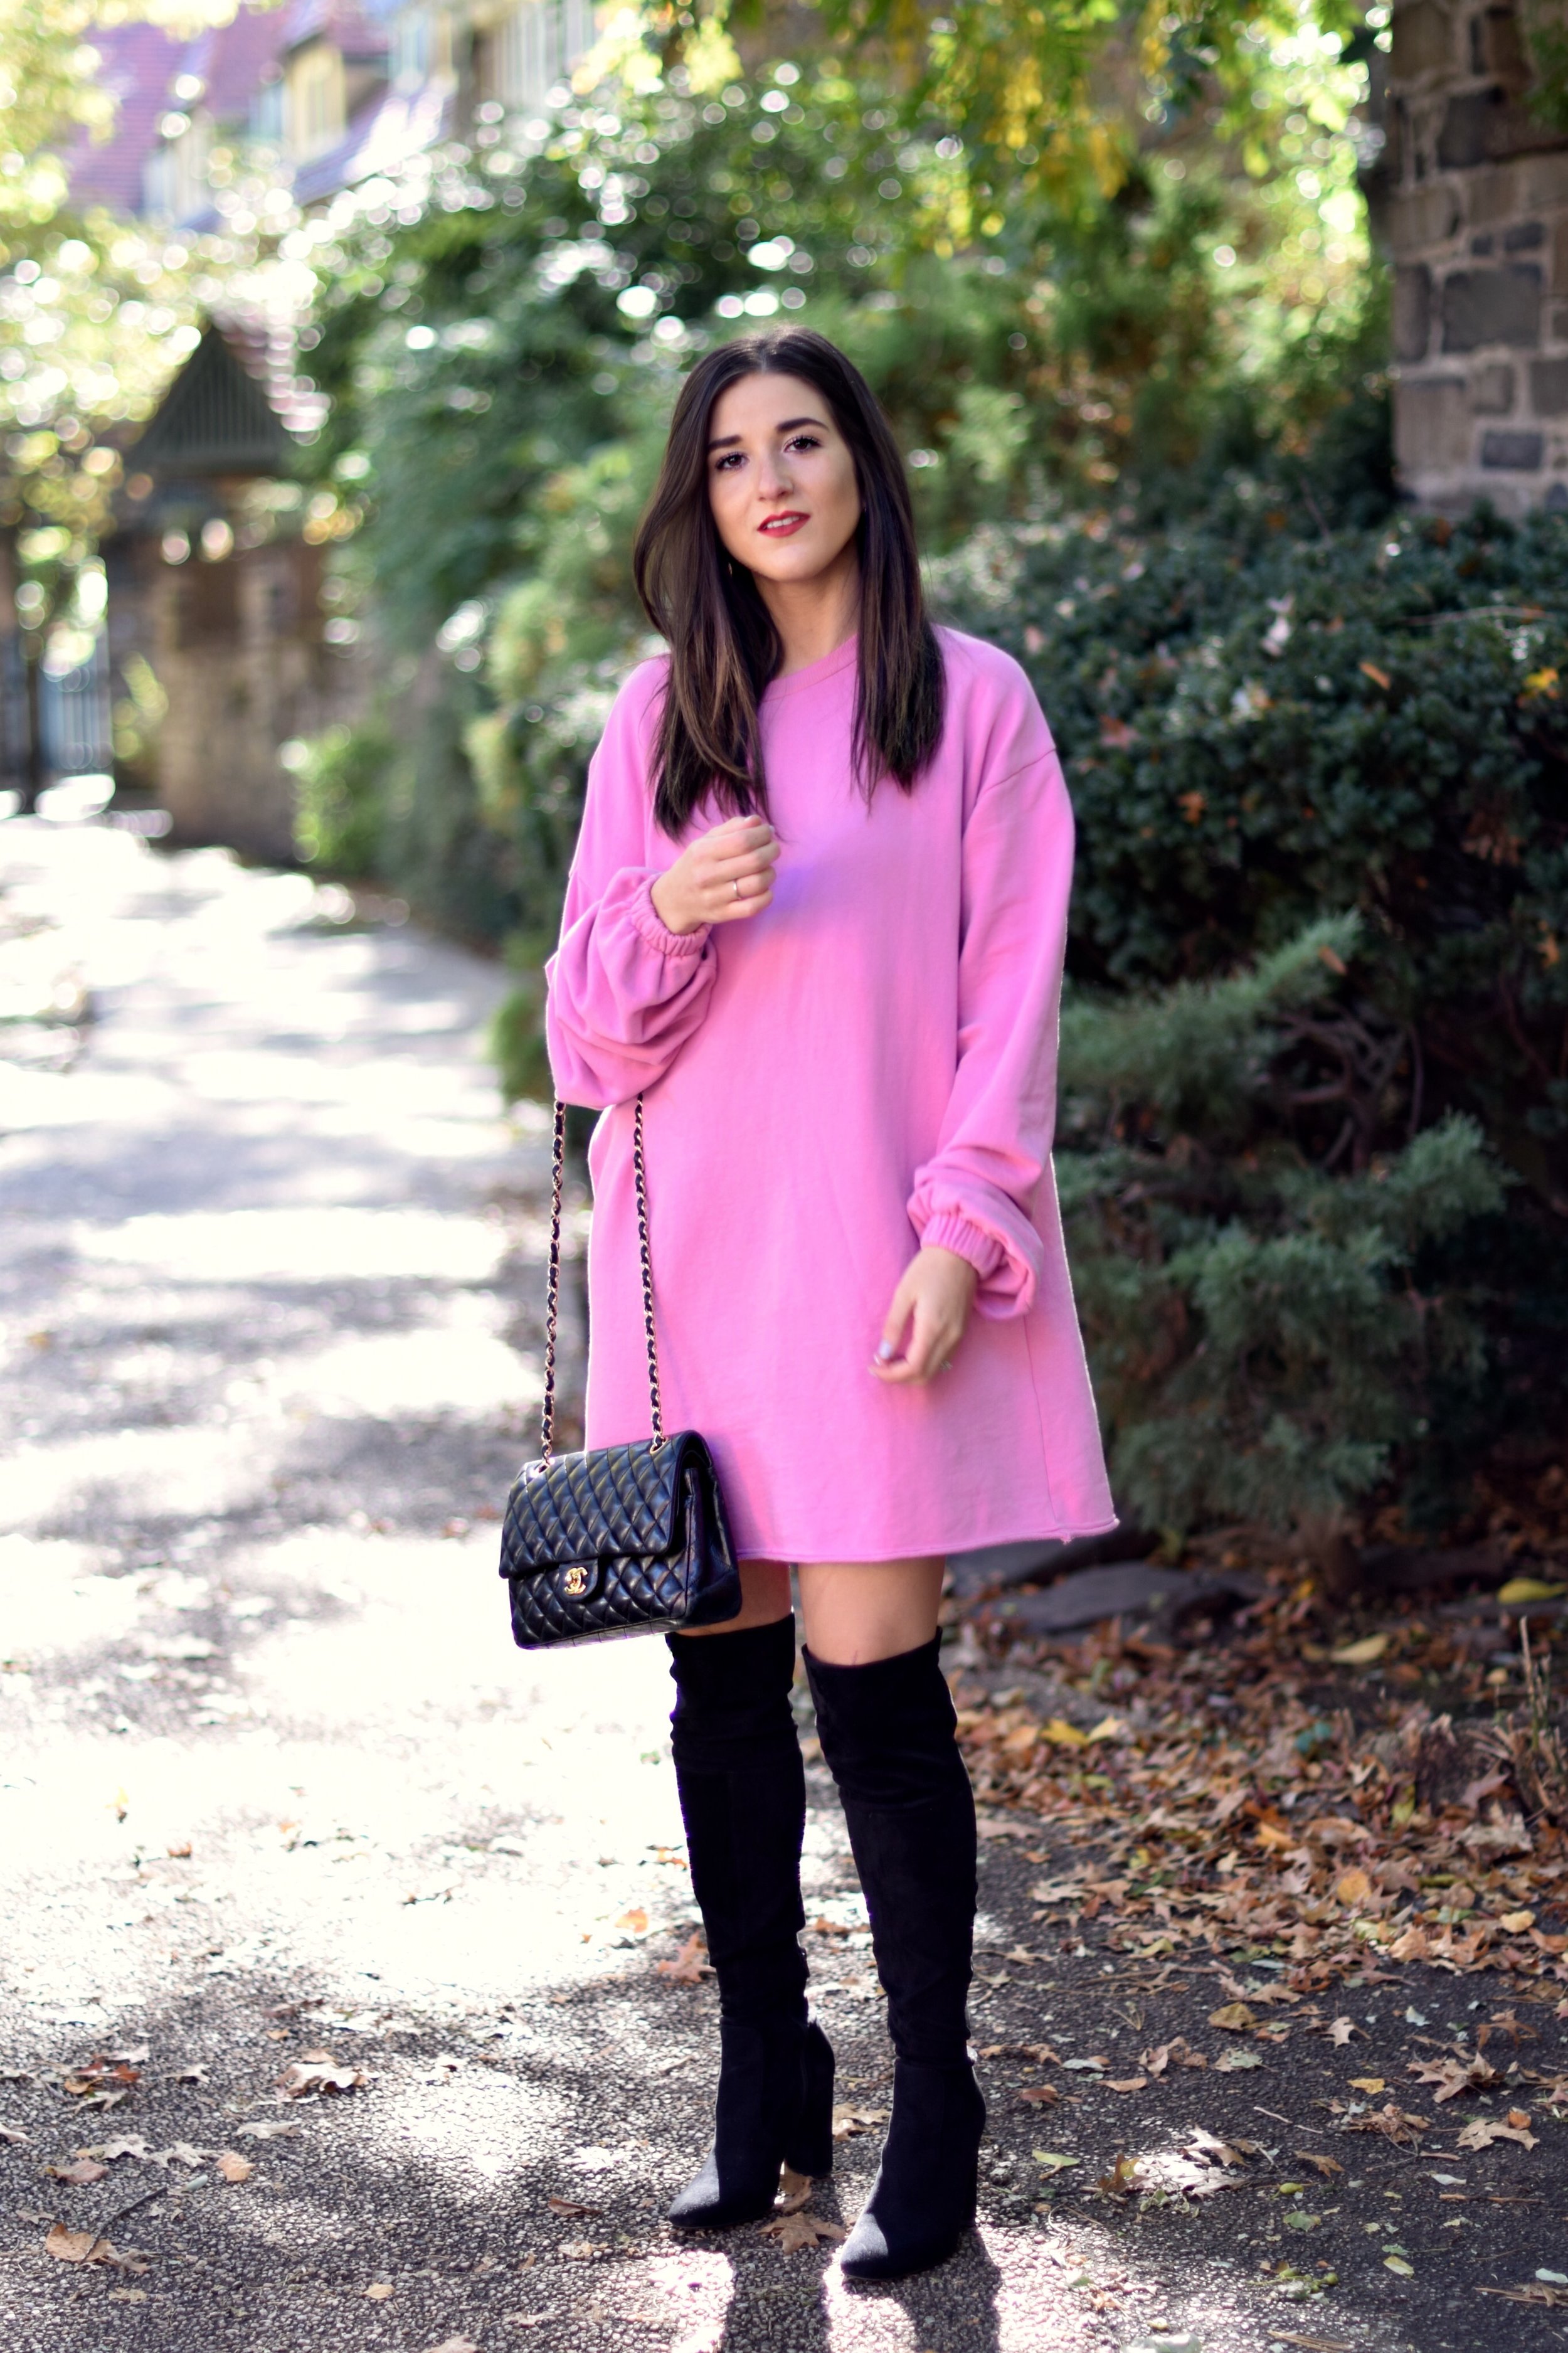 Pink Sweatshirt Dress Black OTK Boots Blogging Before The Days Of Instagram Esther Santer Fashion Blog NYC Street Style Blogger Outfit OOTD Trendy Over The Knee Hair Girl Women New York Chanel Bag  Designer ASOS Pretty Shopping Sale Beautiful Winter.jpg